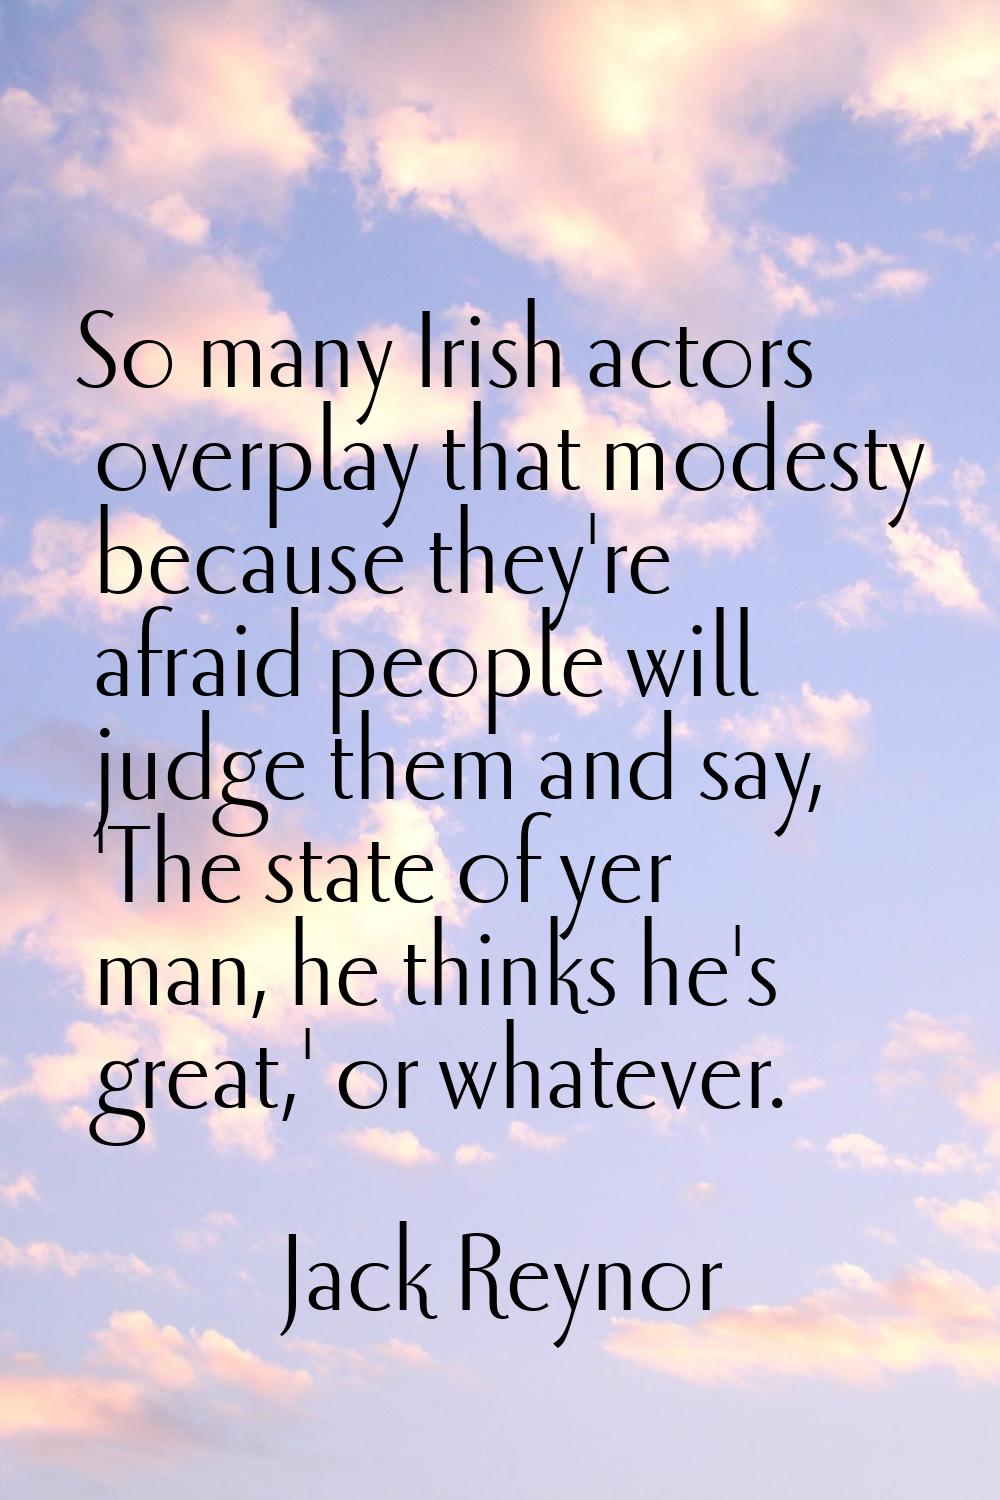 So many Irish actors overplay that modesty because they're afraid people will judge them and say, '